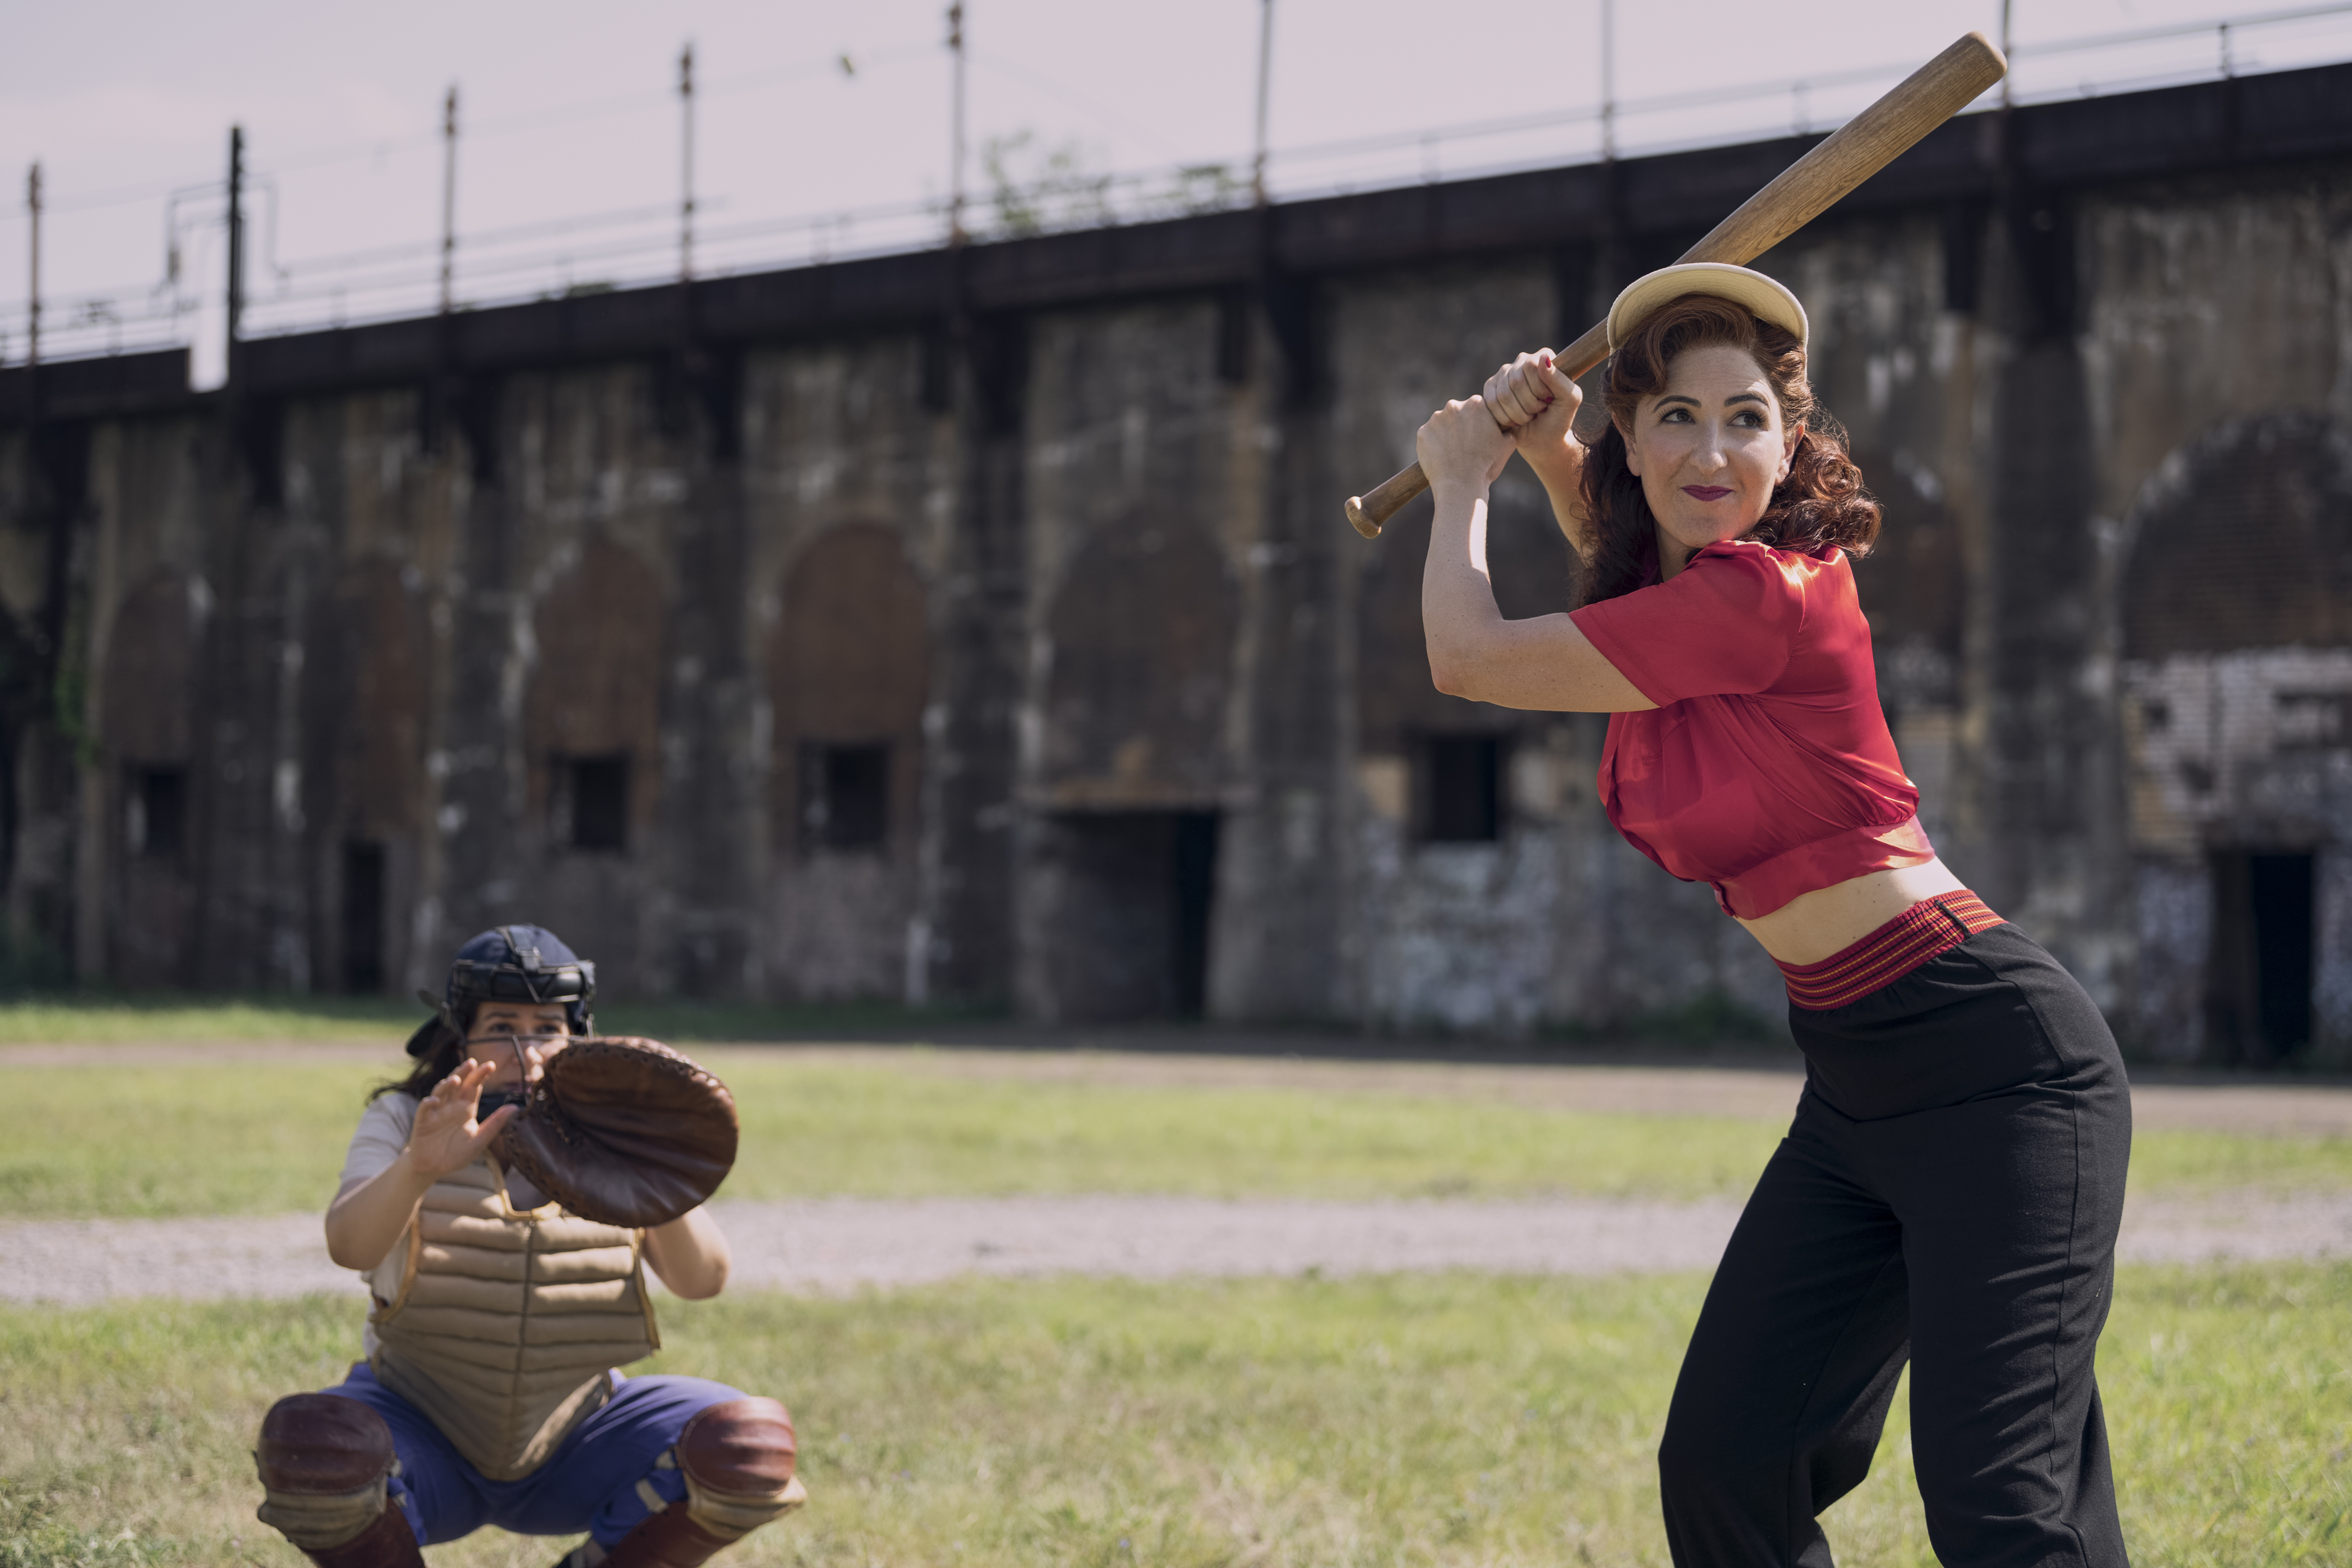 A League of Their Own 2022 Amazon Prime release date, trailer, and cast with Abbi Jacobson and Chanté Adams